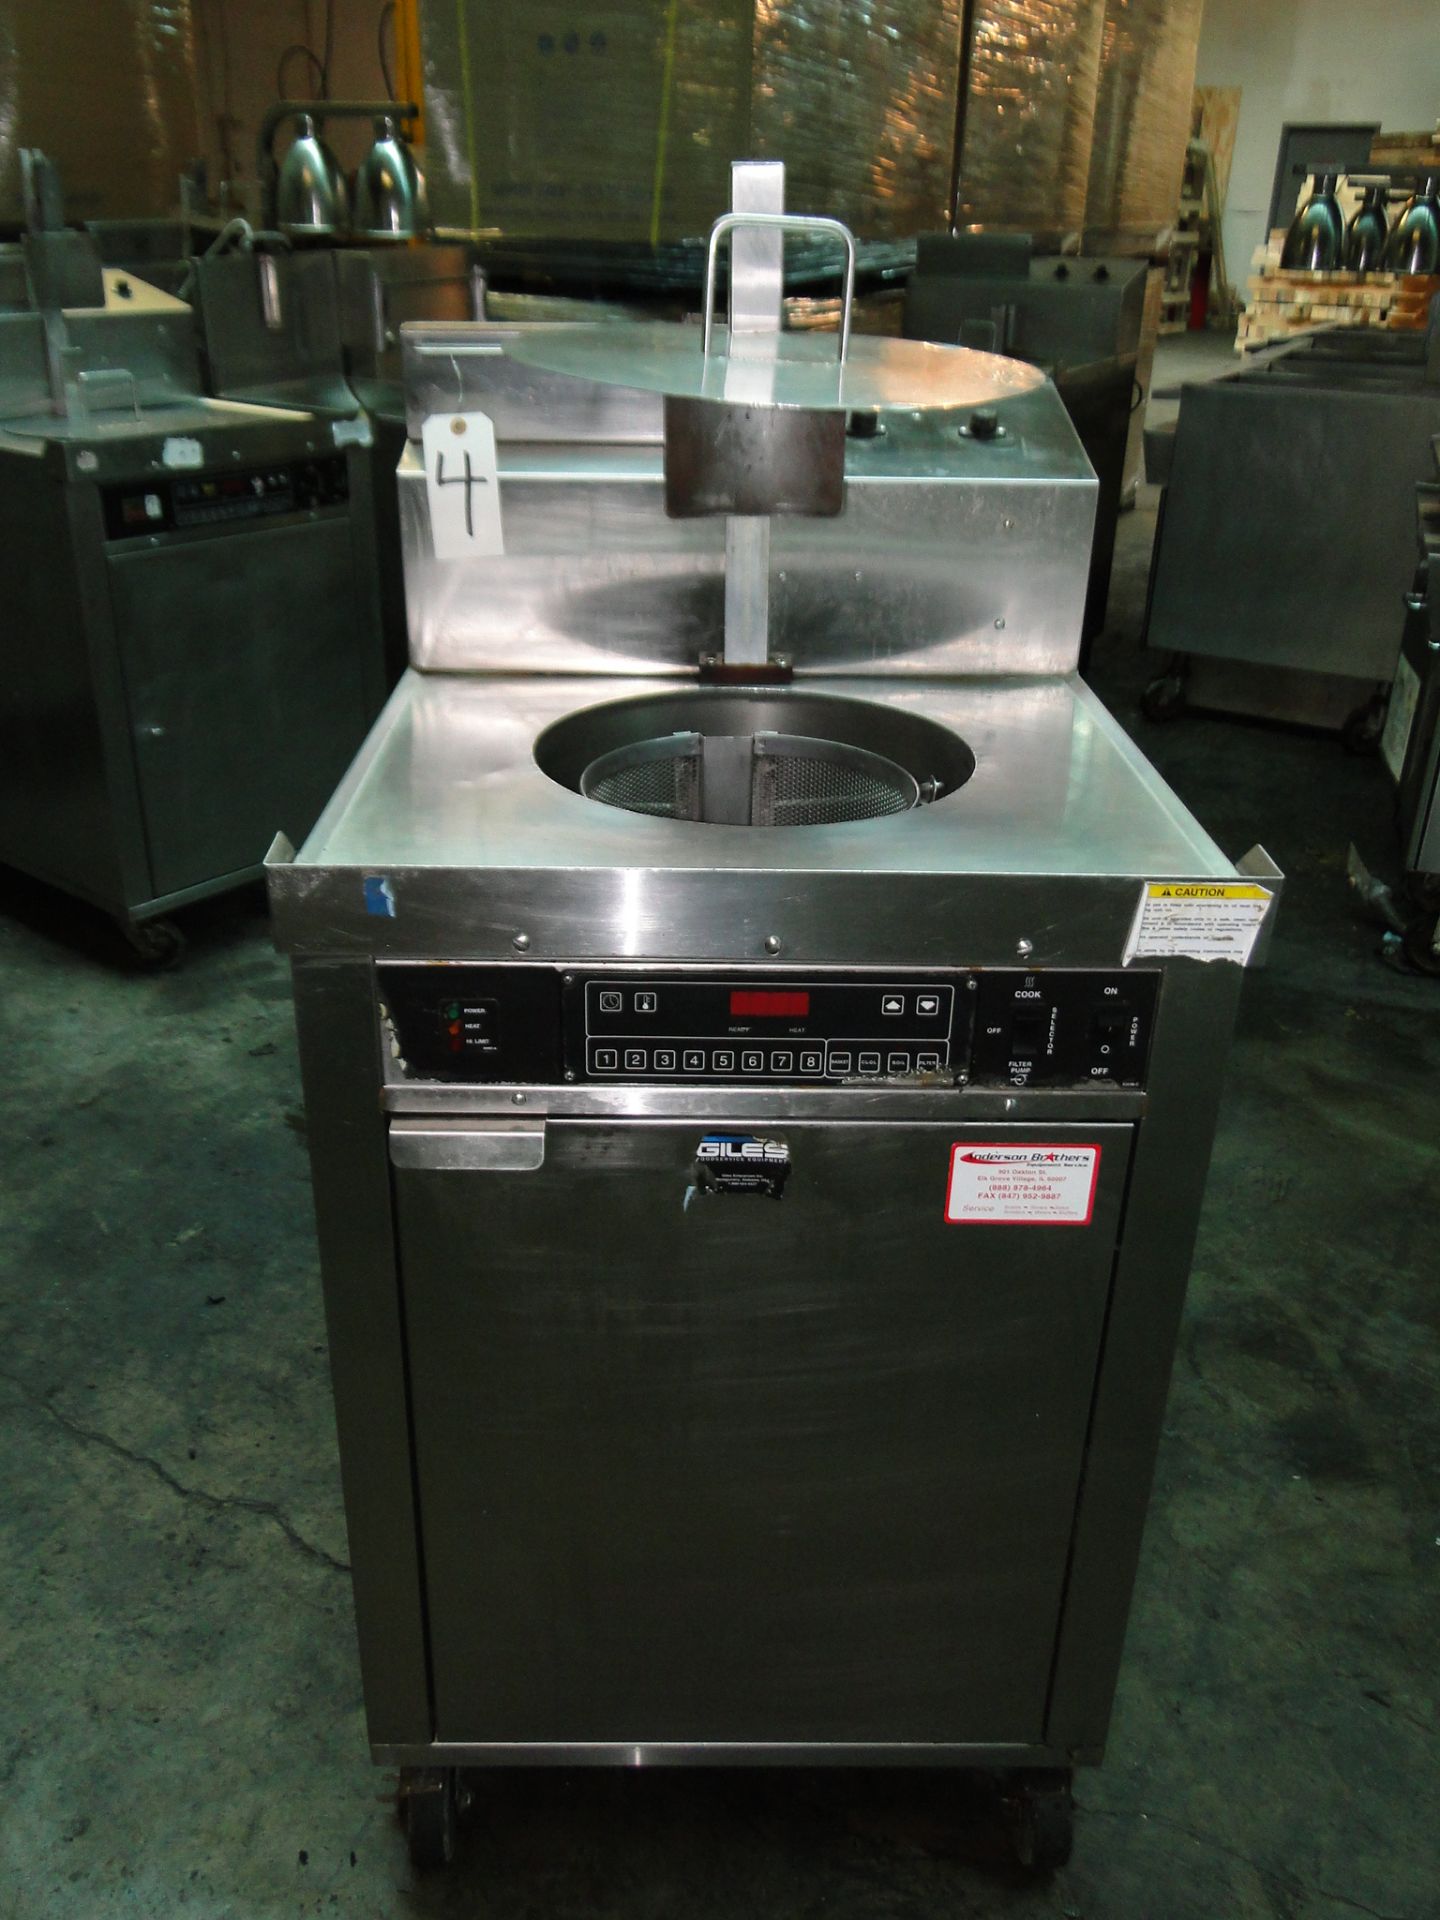 Giles "Chester Fried" Gas Fired Deep Fryer with Auto Lift, Model CF4006, S/N: A410140206, Equipped